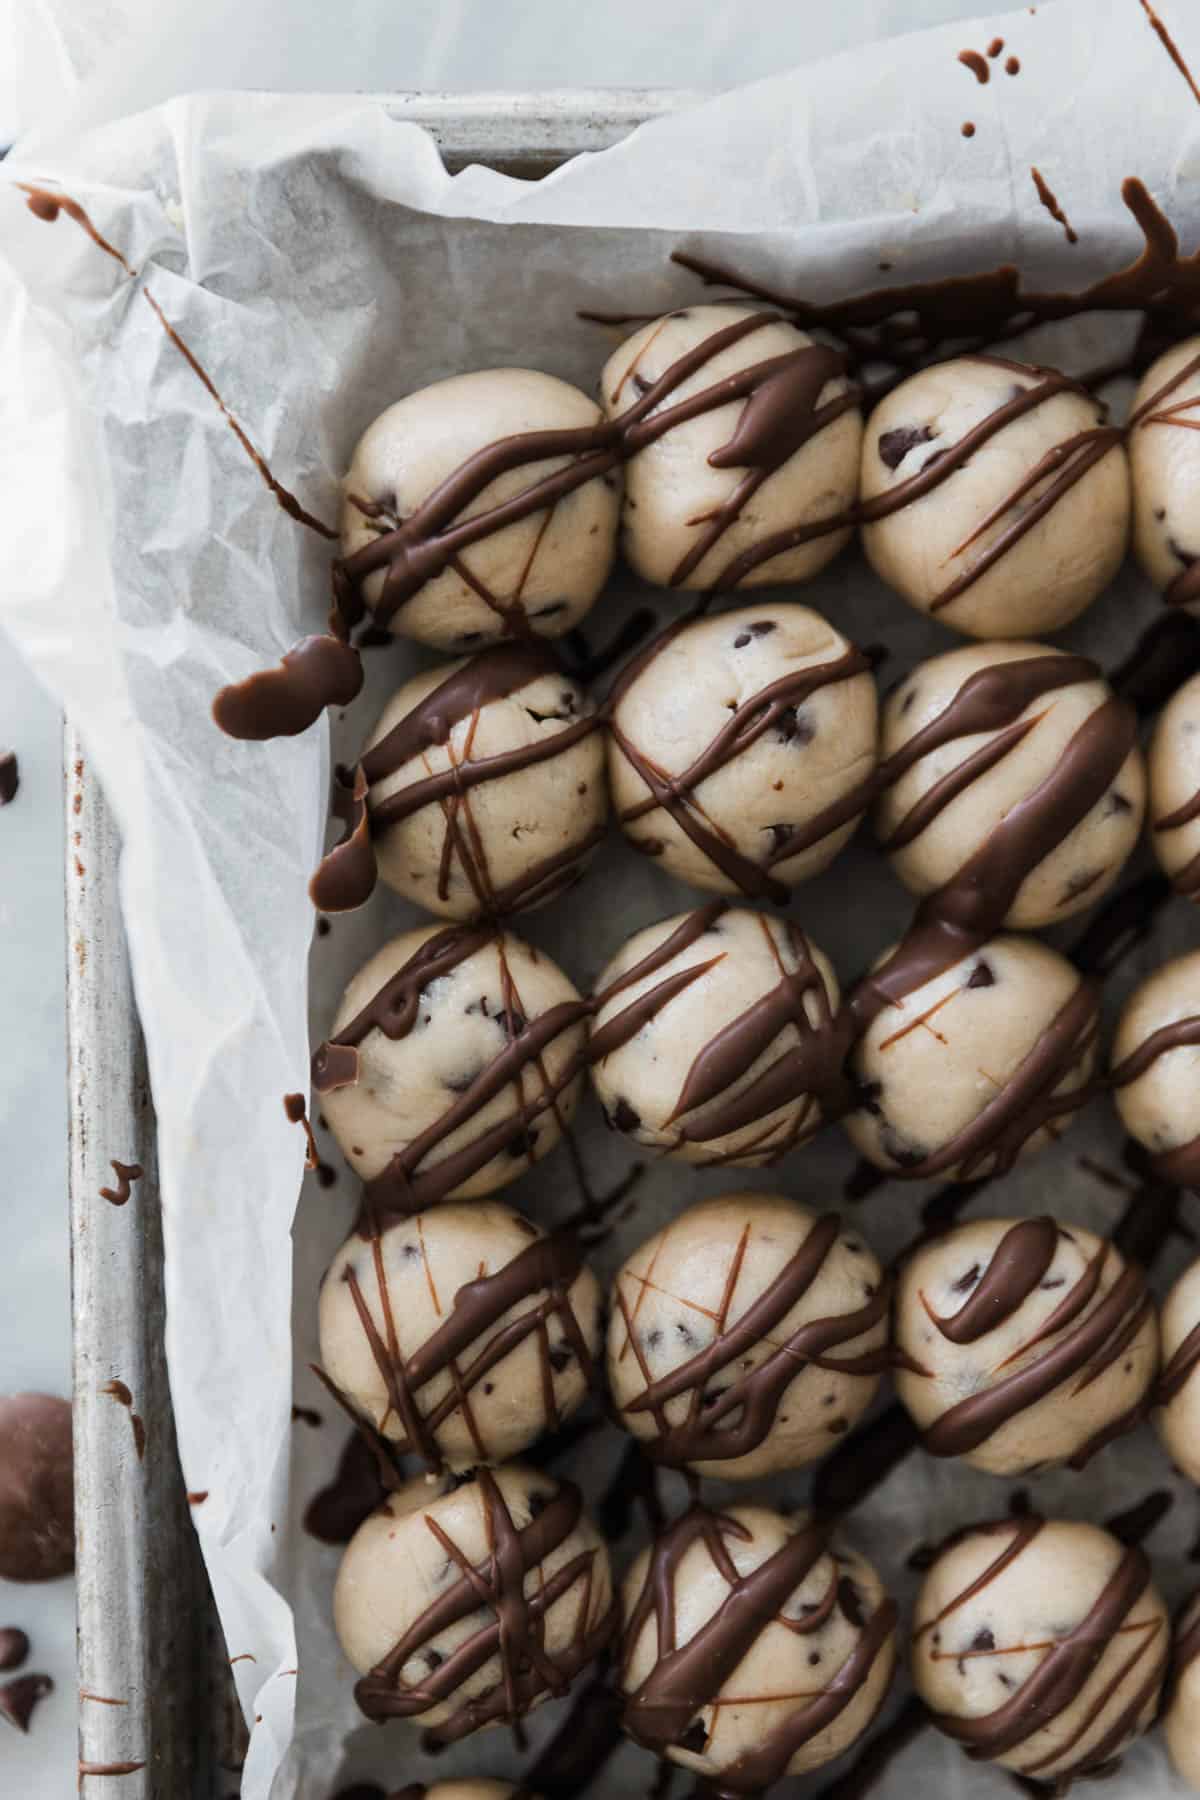 Several small cookie dough balls with chocolate coating drizzled on a baking sheet. 